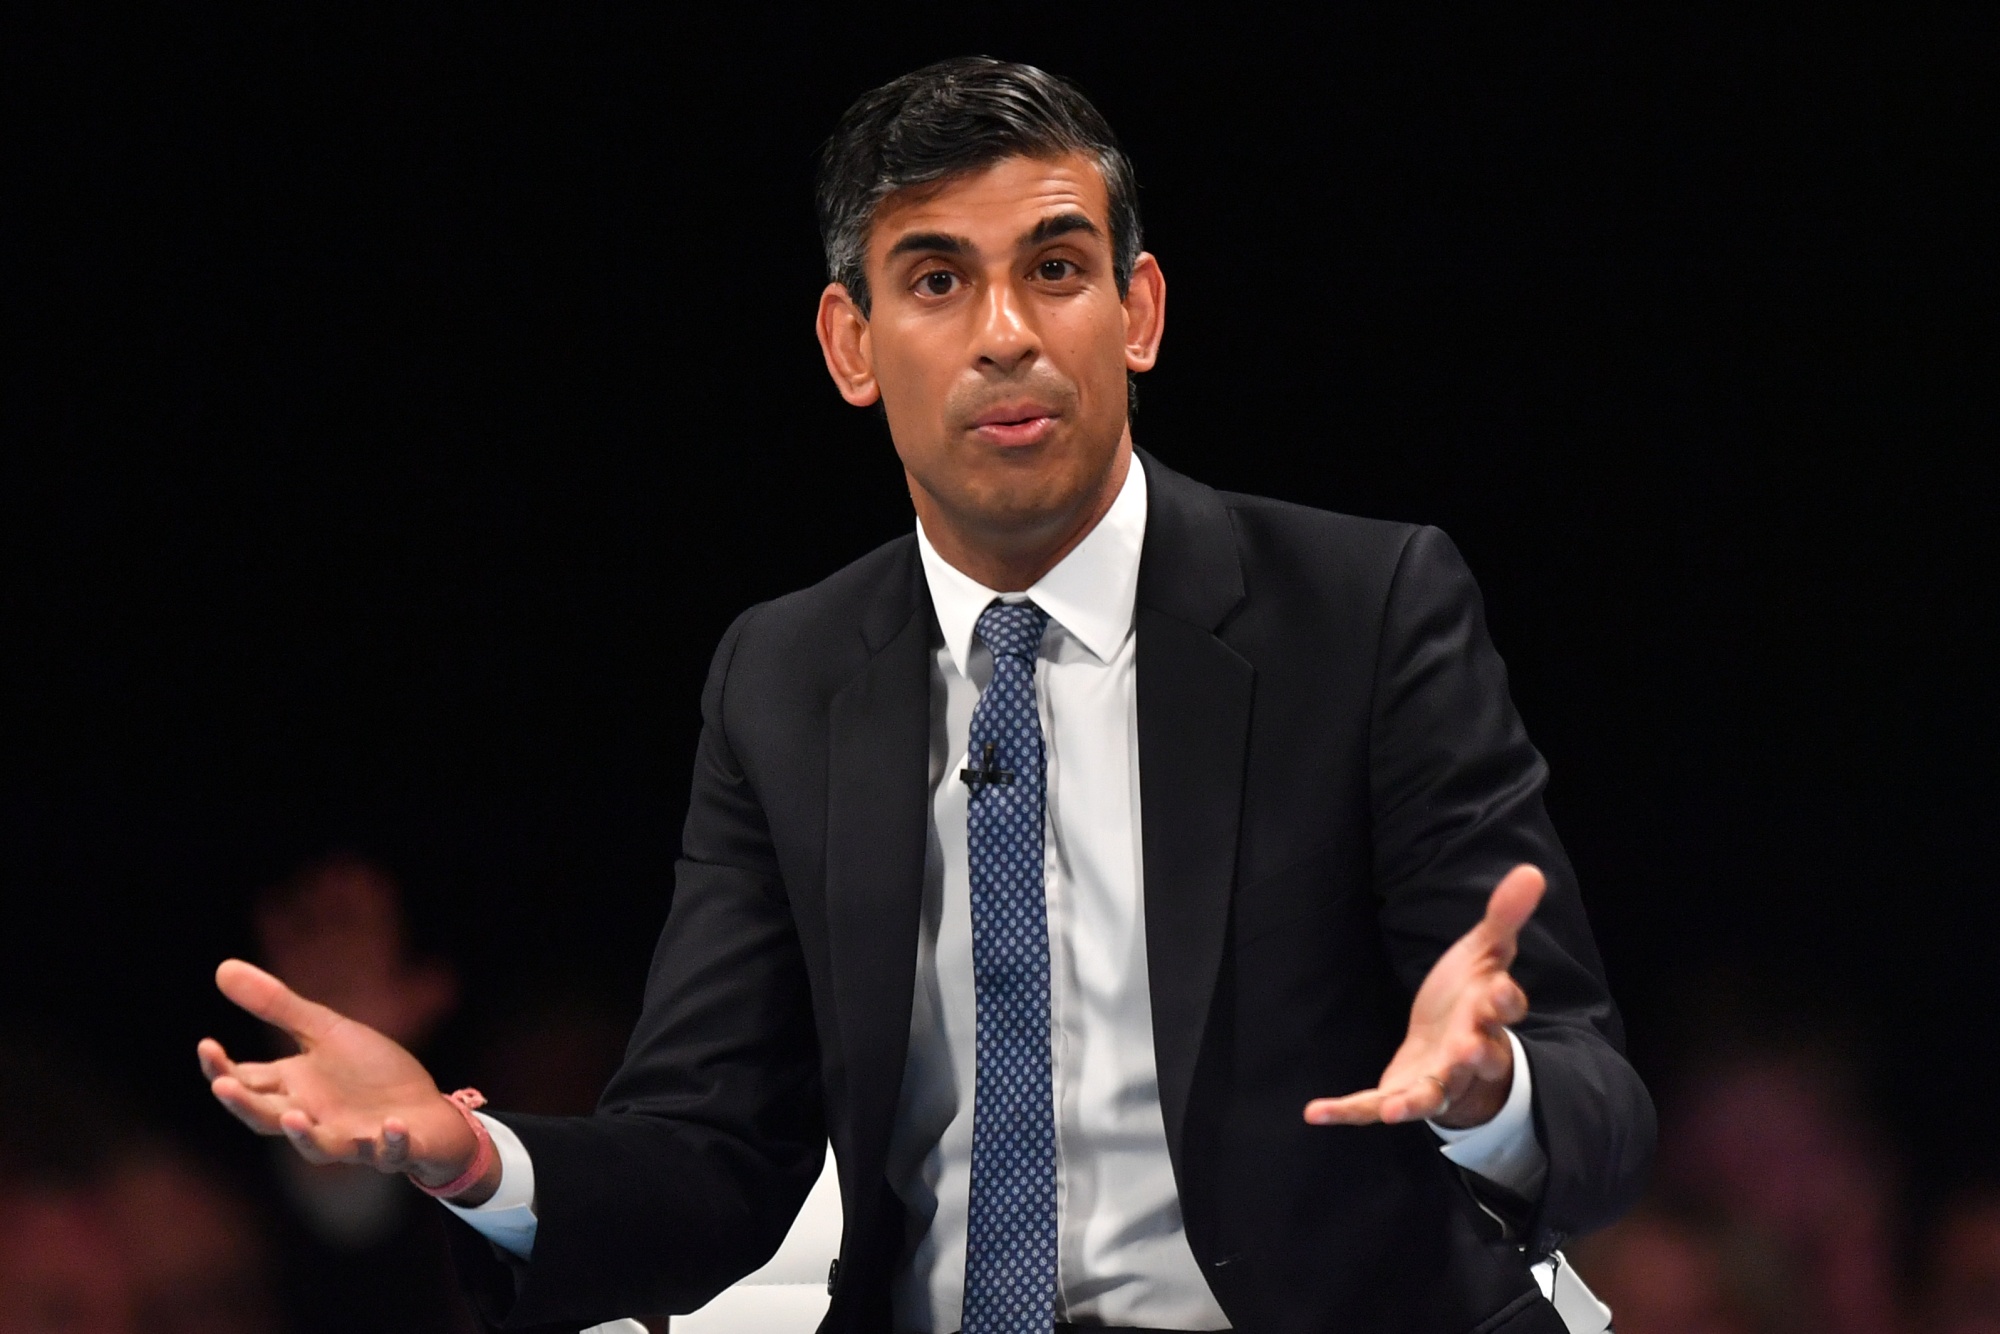 Rishi Sunak answers questions from party members in the audience during the first Conservative Party leadership hustings in Leeds, UK, on&nbsp;July 28.&nbsp;